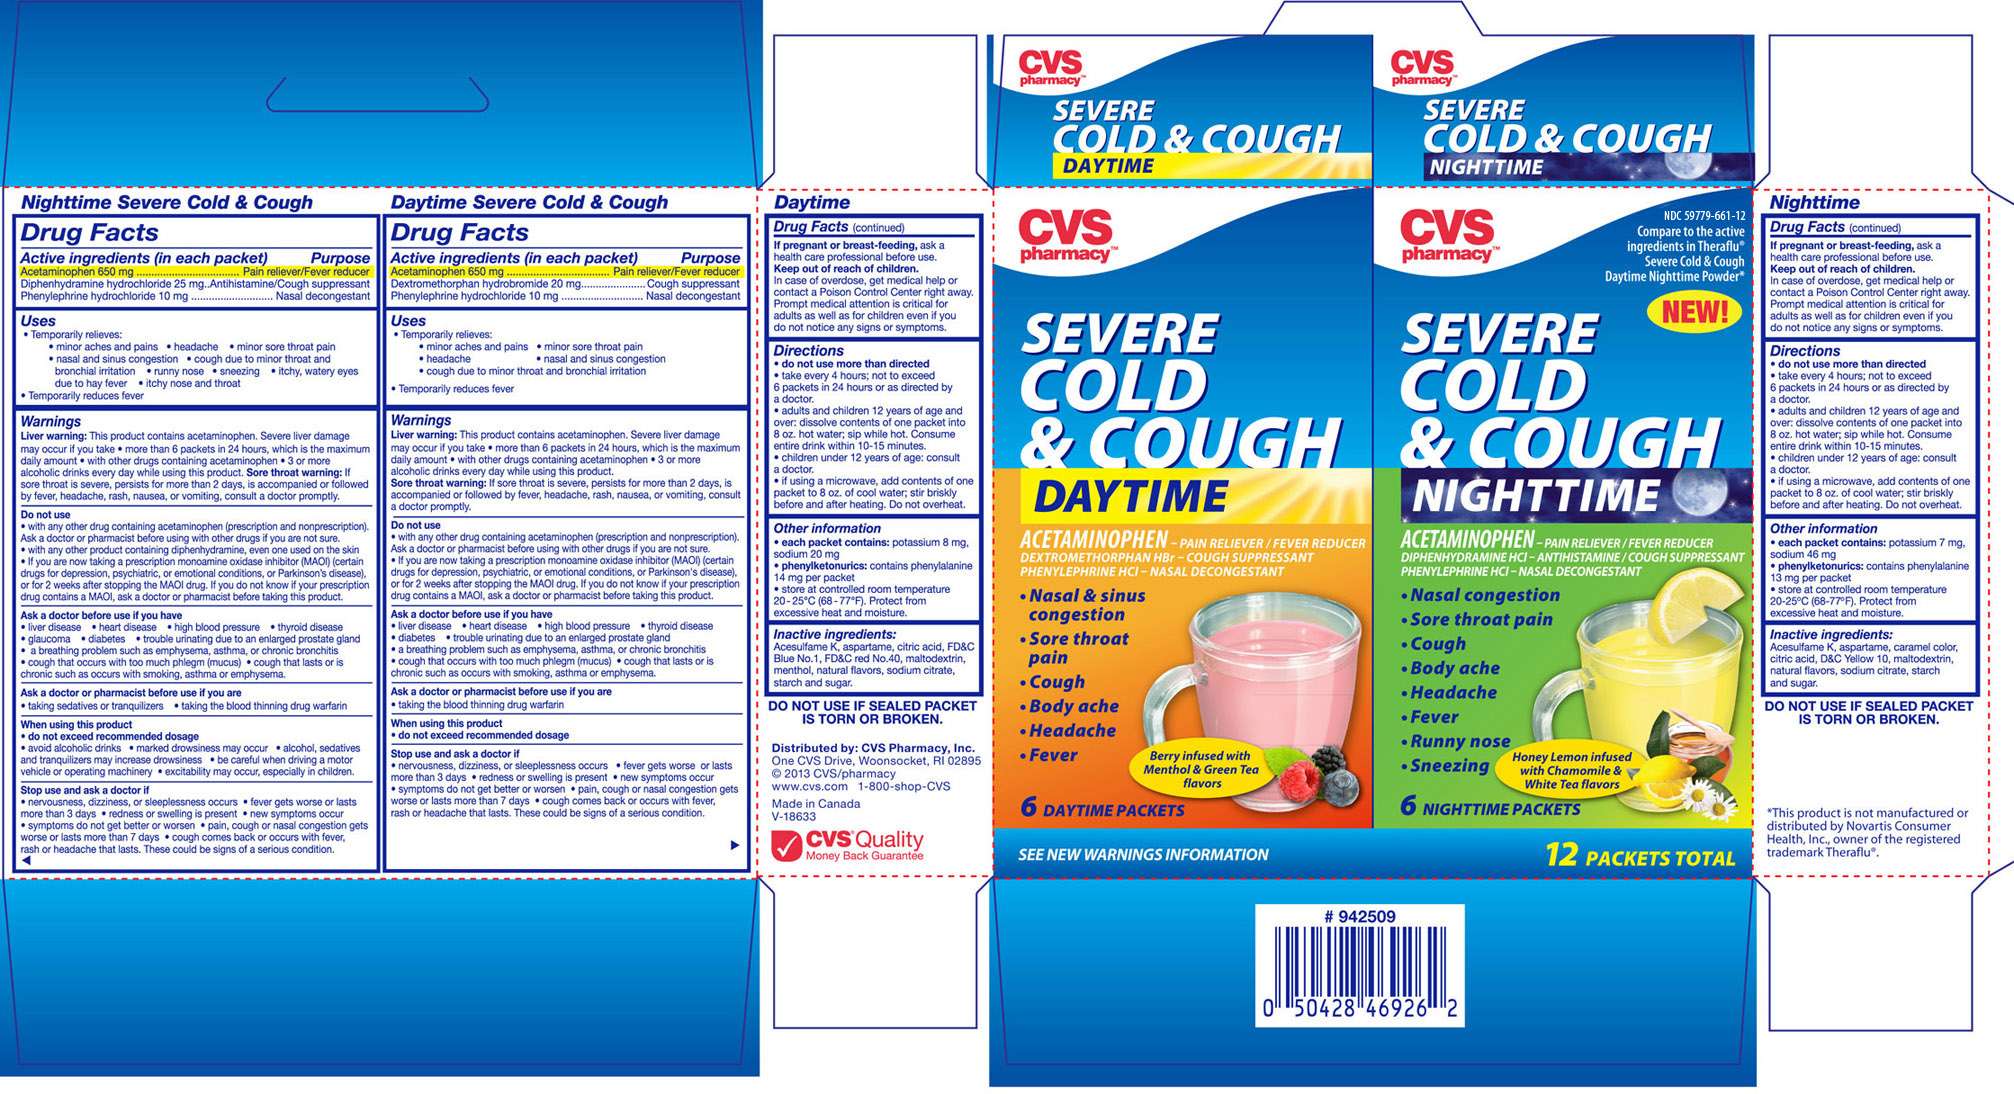 CVS Pharmacy Daytime Nighttime Severe Cold and Cough Kit